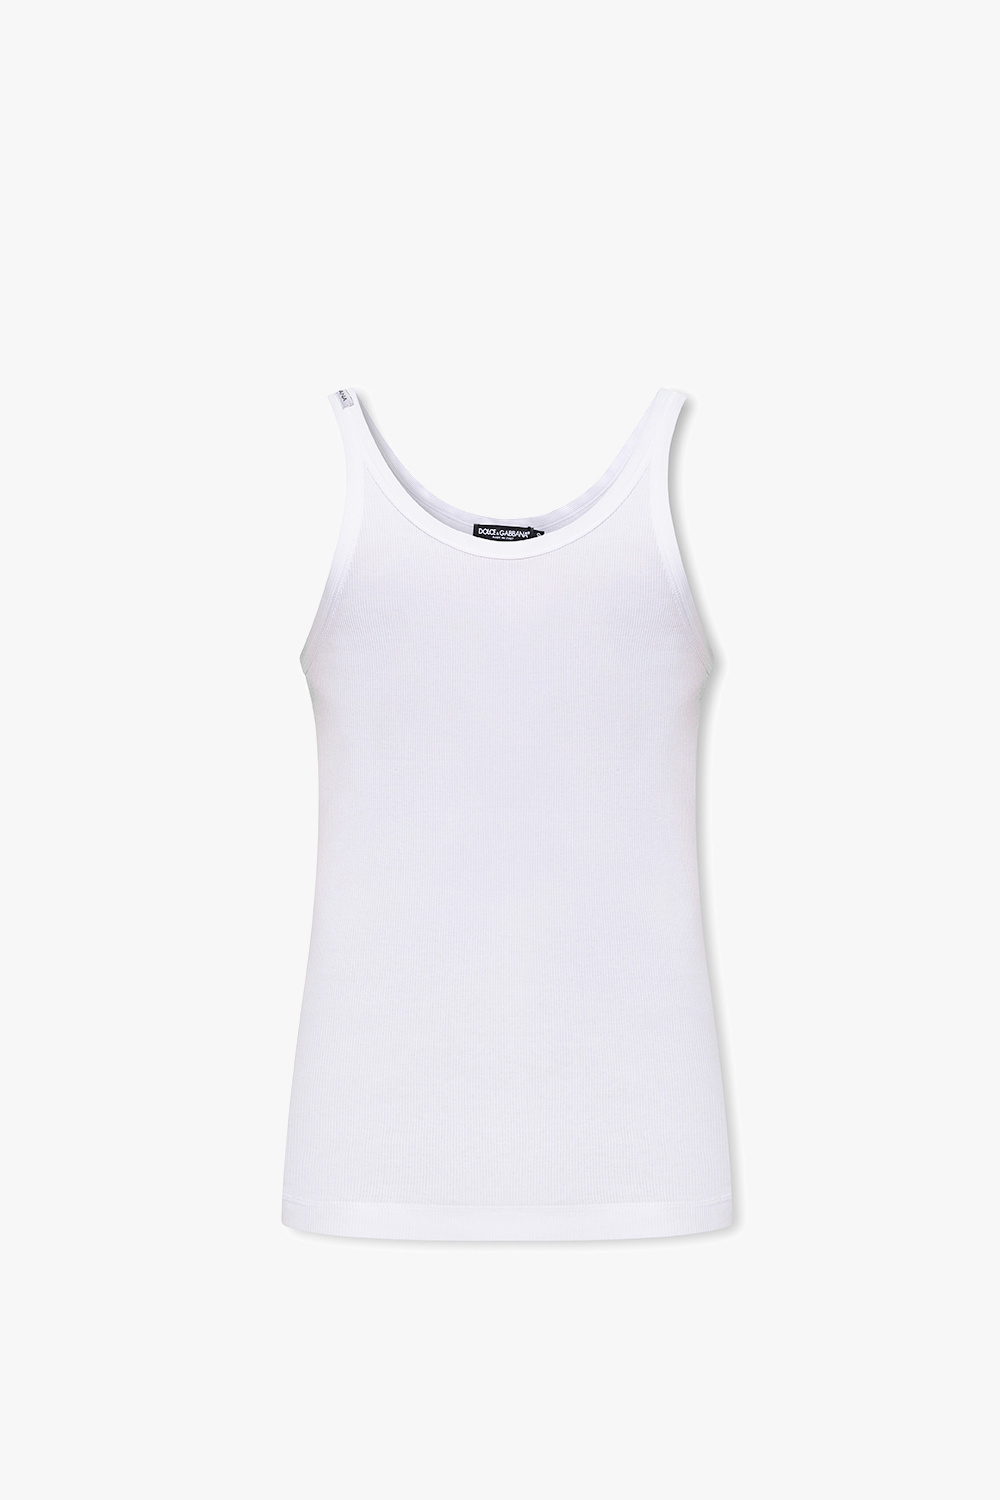 Dolce & Gabbana Logo-patched tank top